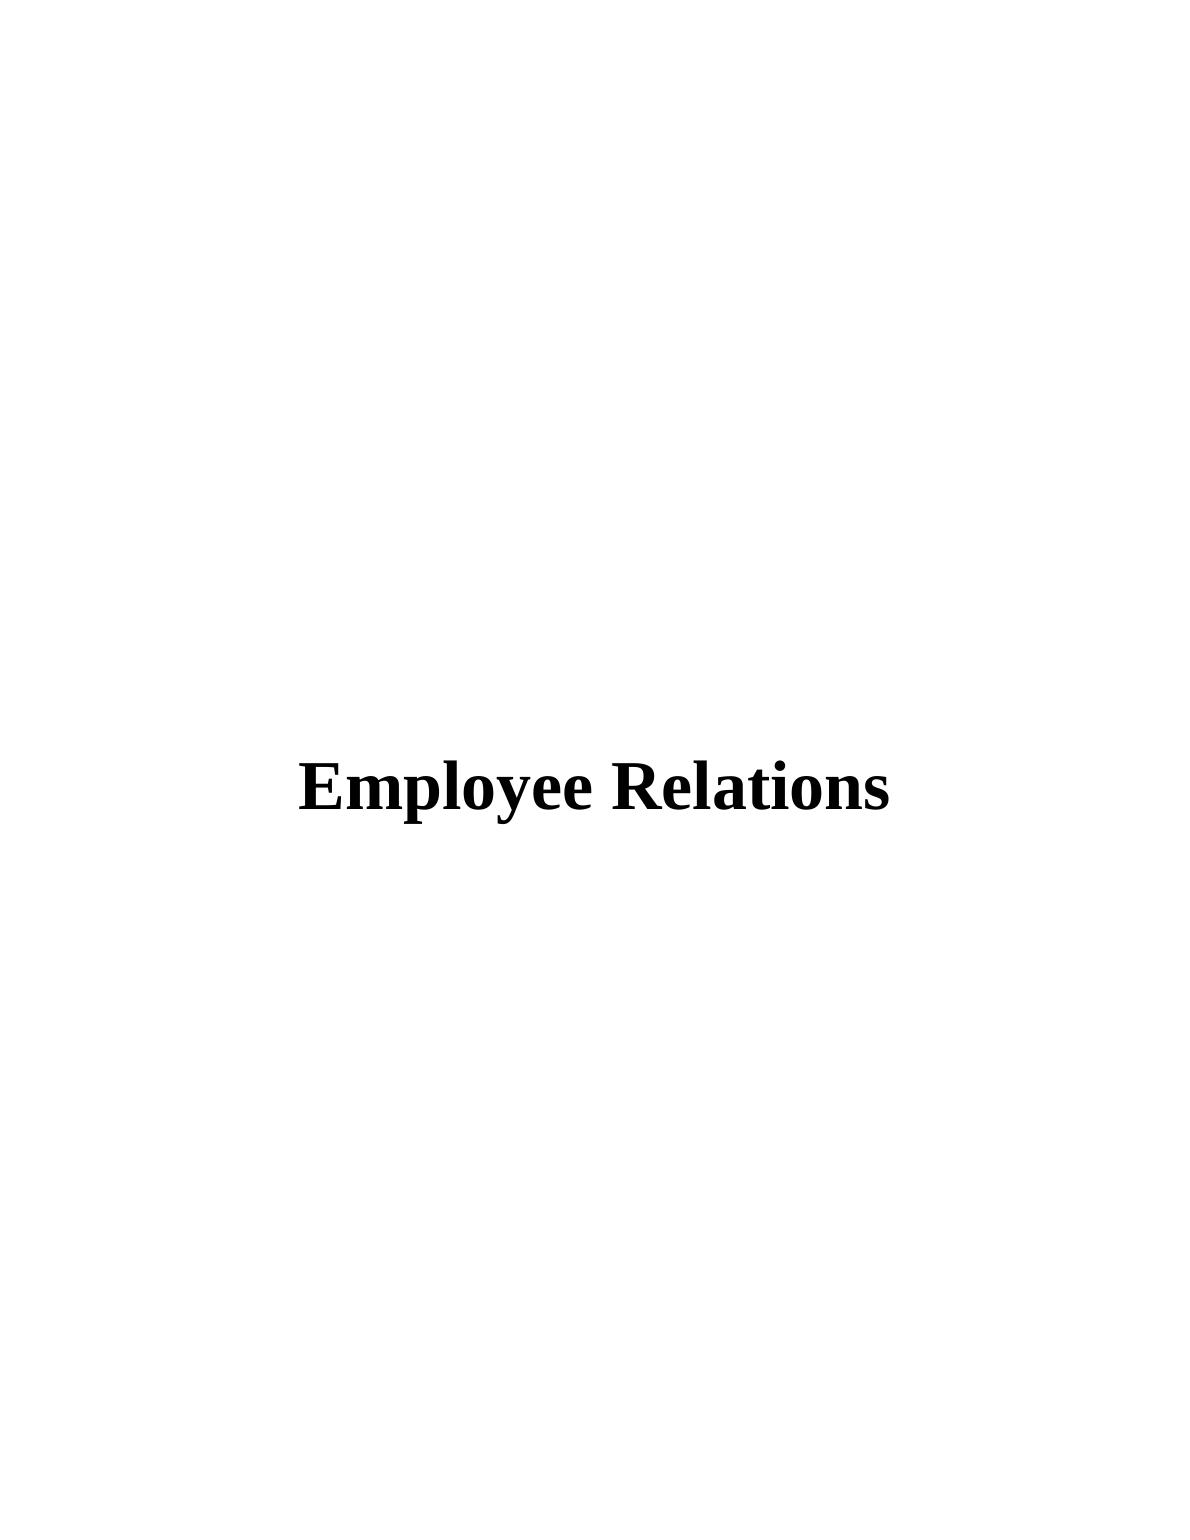 Impact of Human Resources on the Employee Relations_1